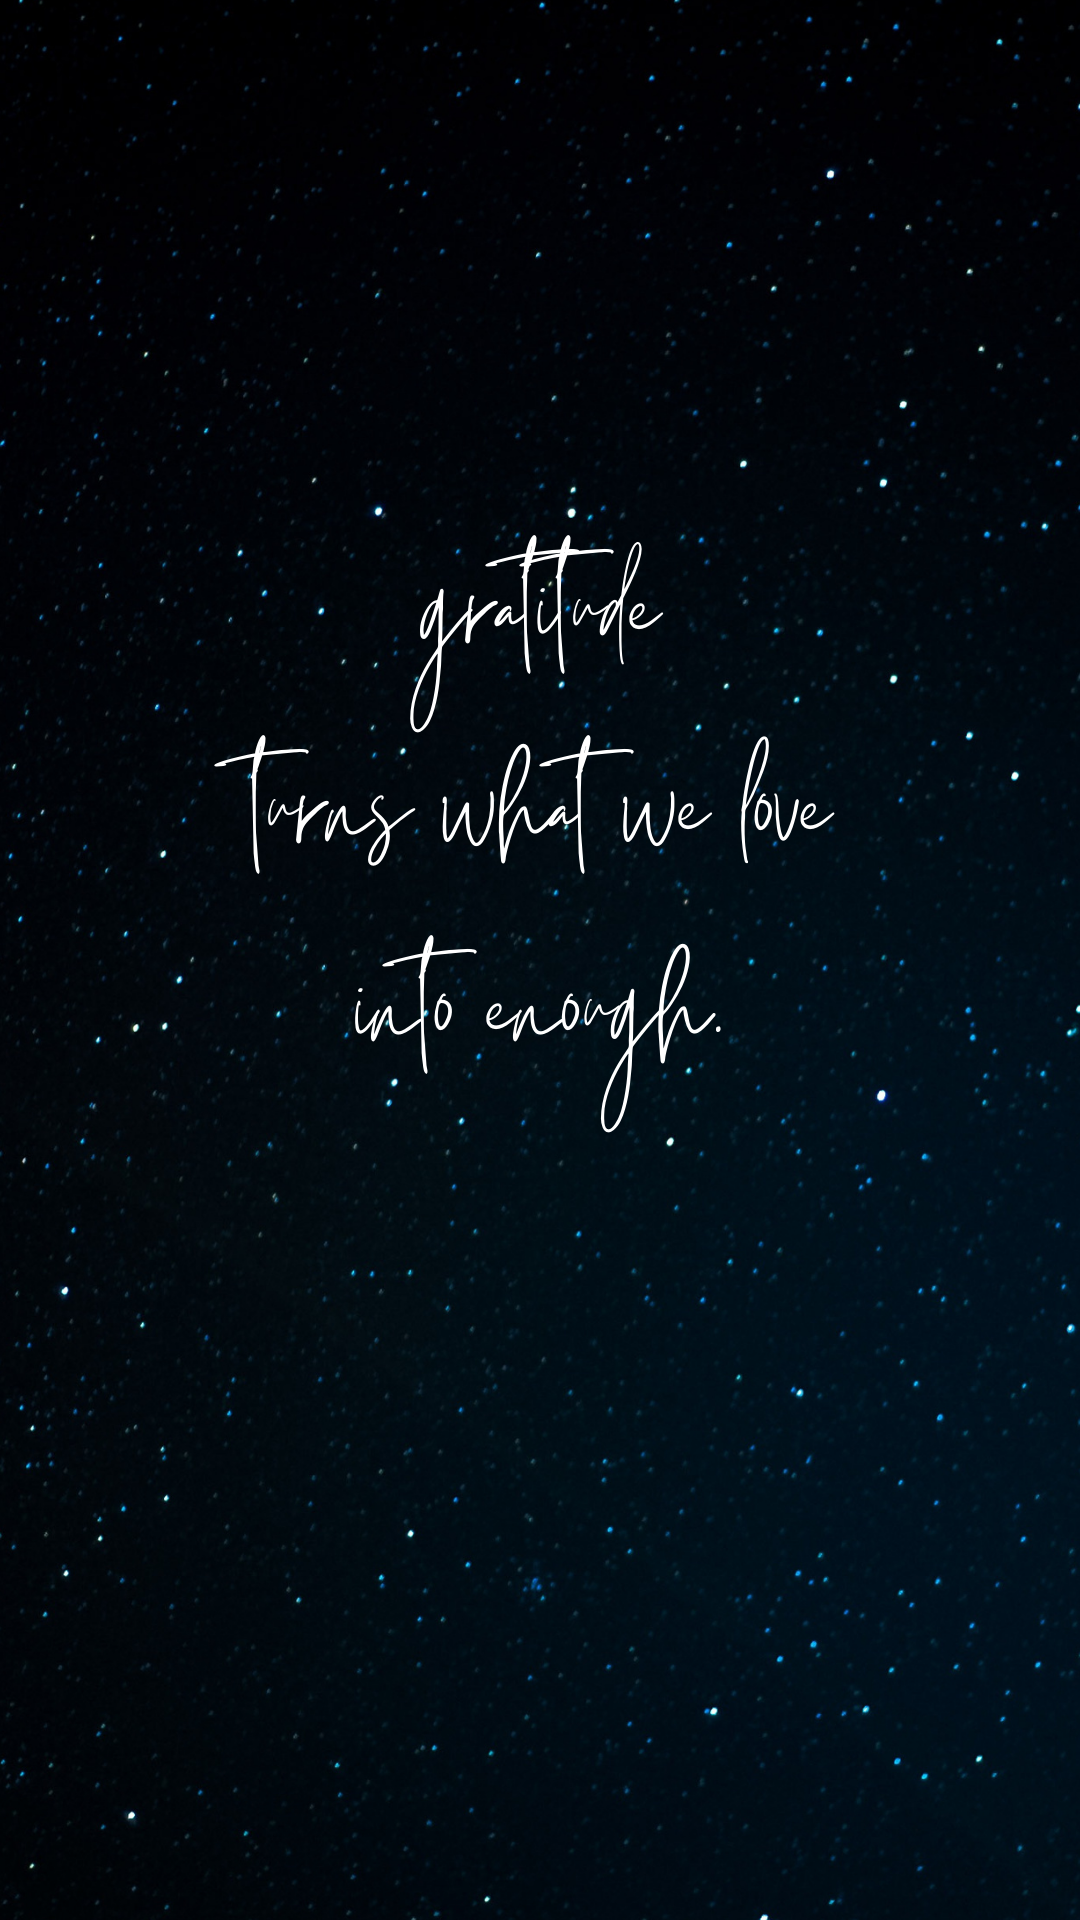 Gratitude turns what we love into enough